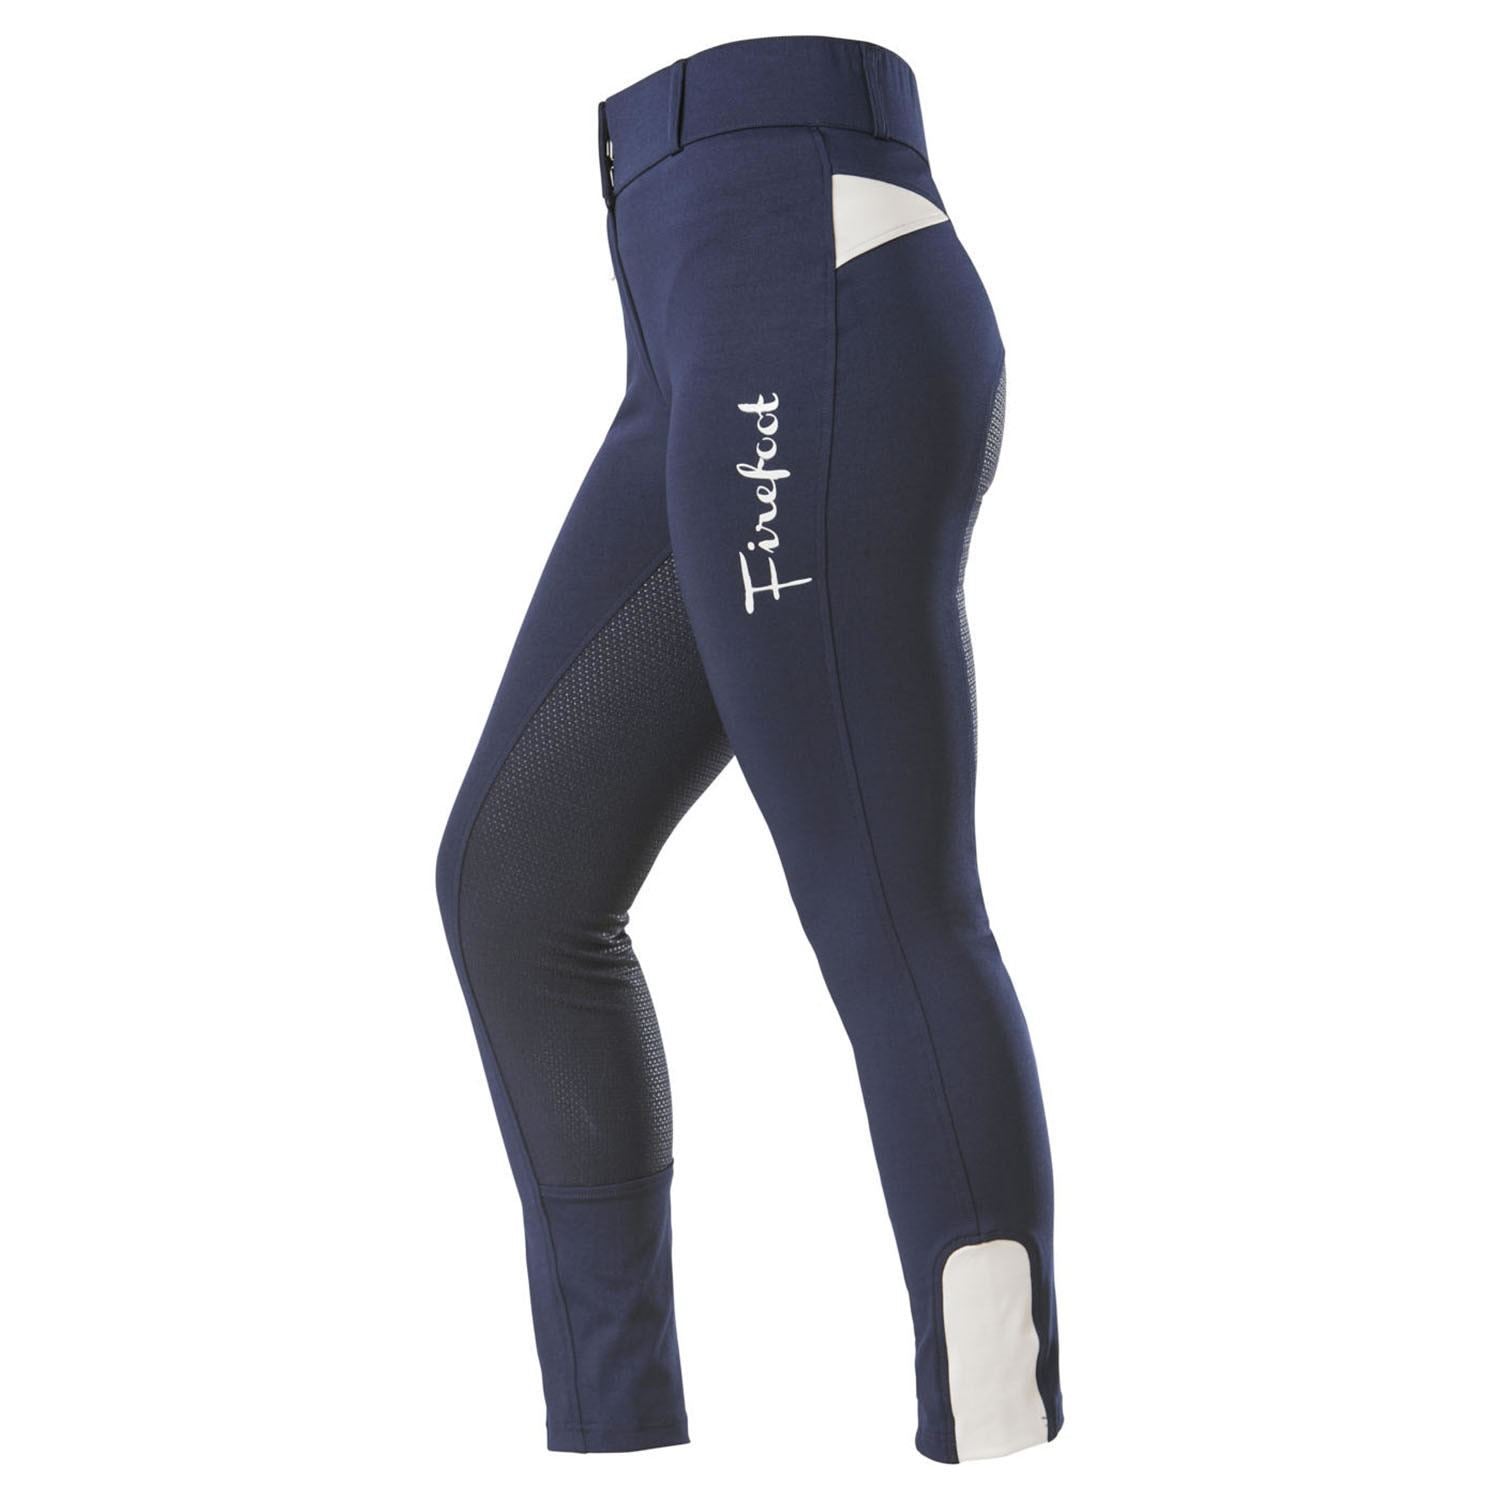 Firefoot Bankfield Sticky Bum Breeches Ladies - Just Horse Riders